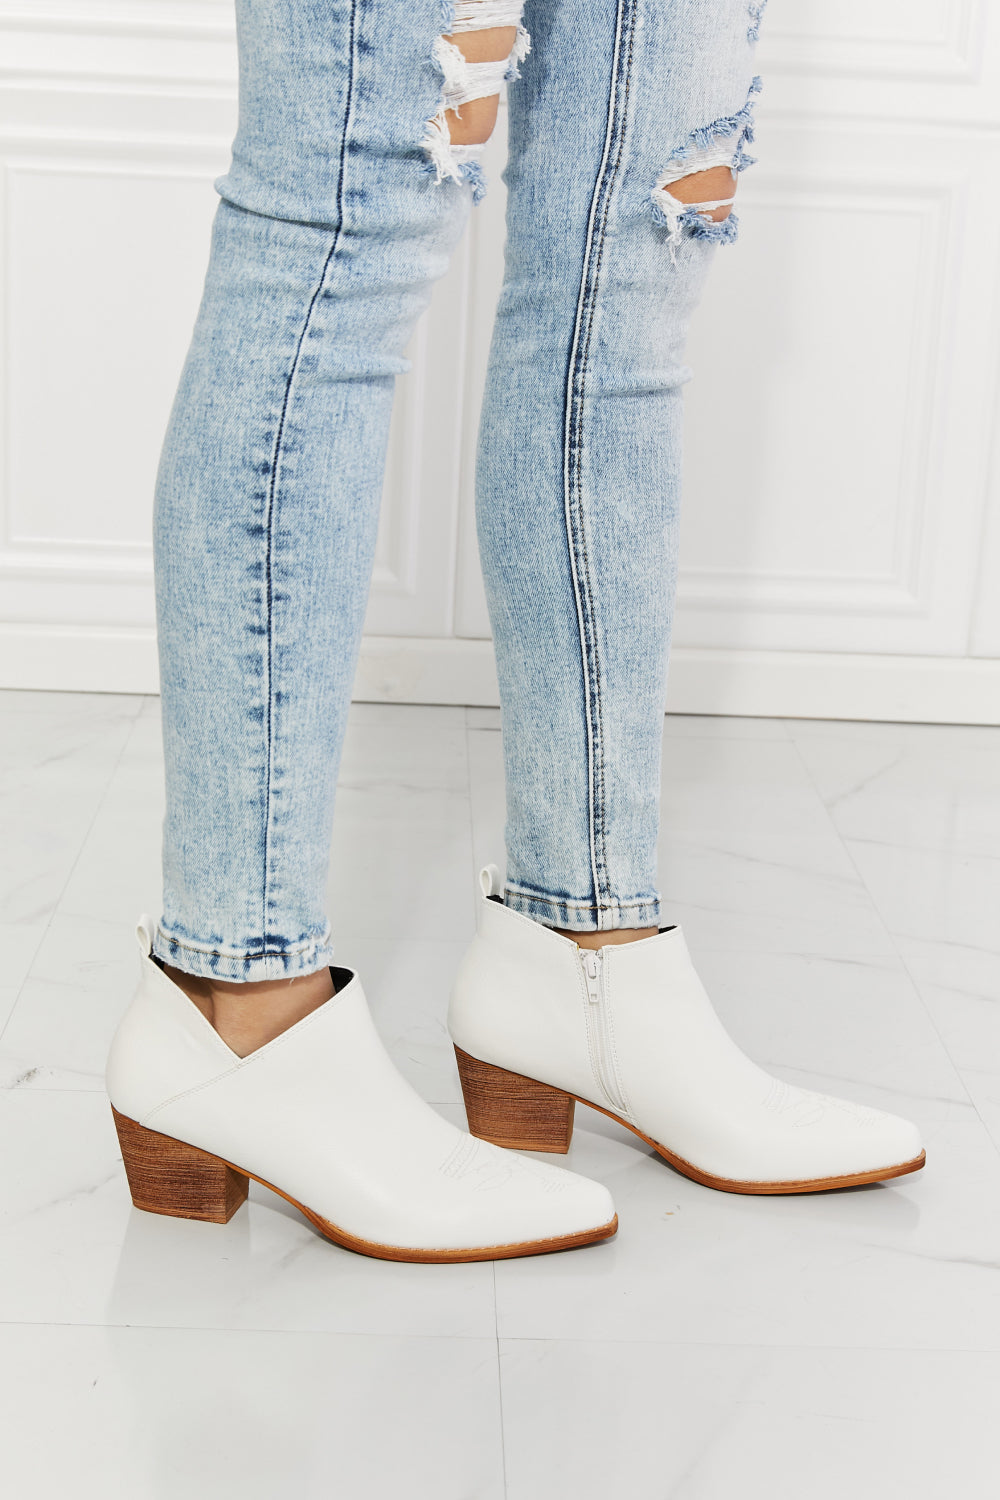 MMShoes Trust Yourself Embroidered Crossover Cowboy Bootie in White - Tigbul's Fashion